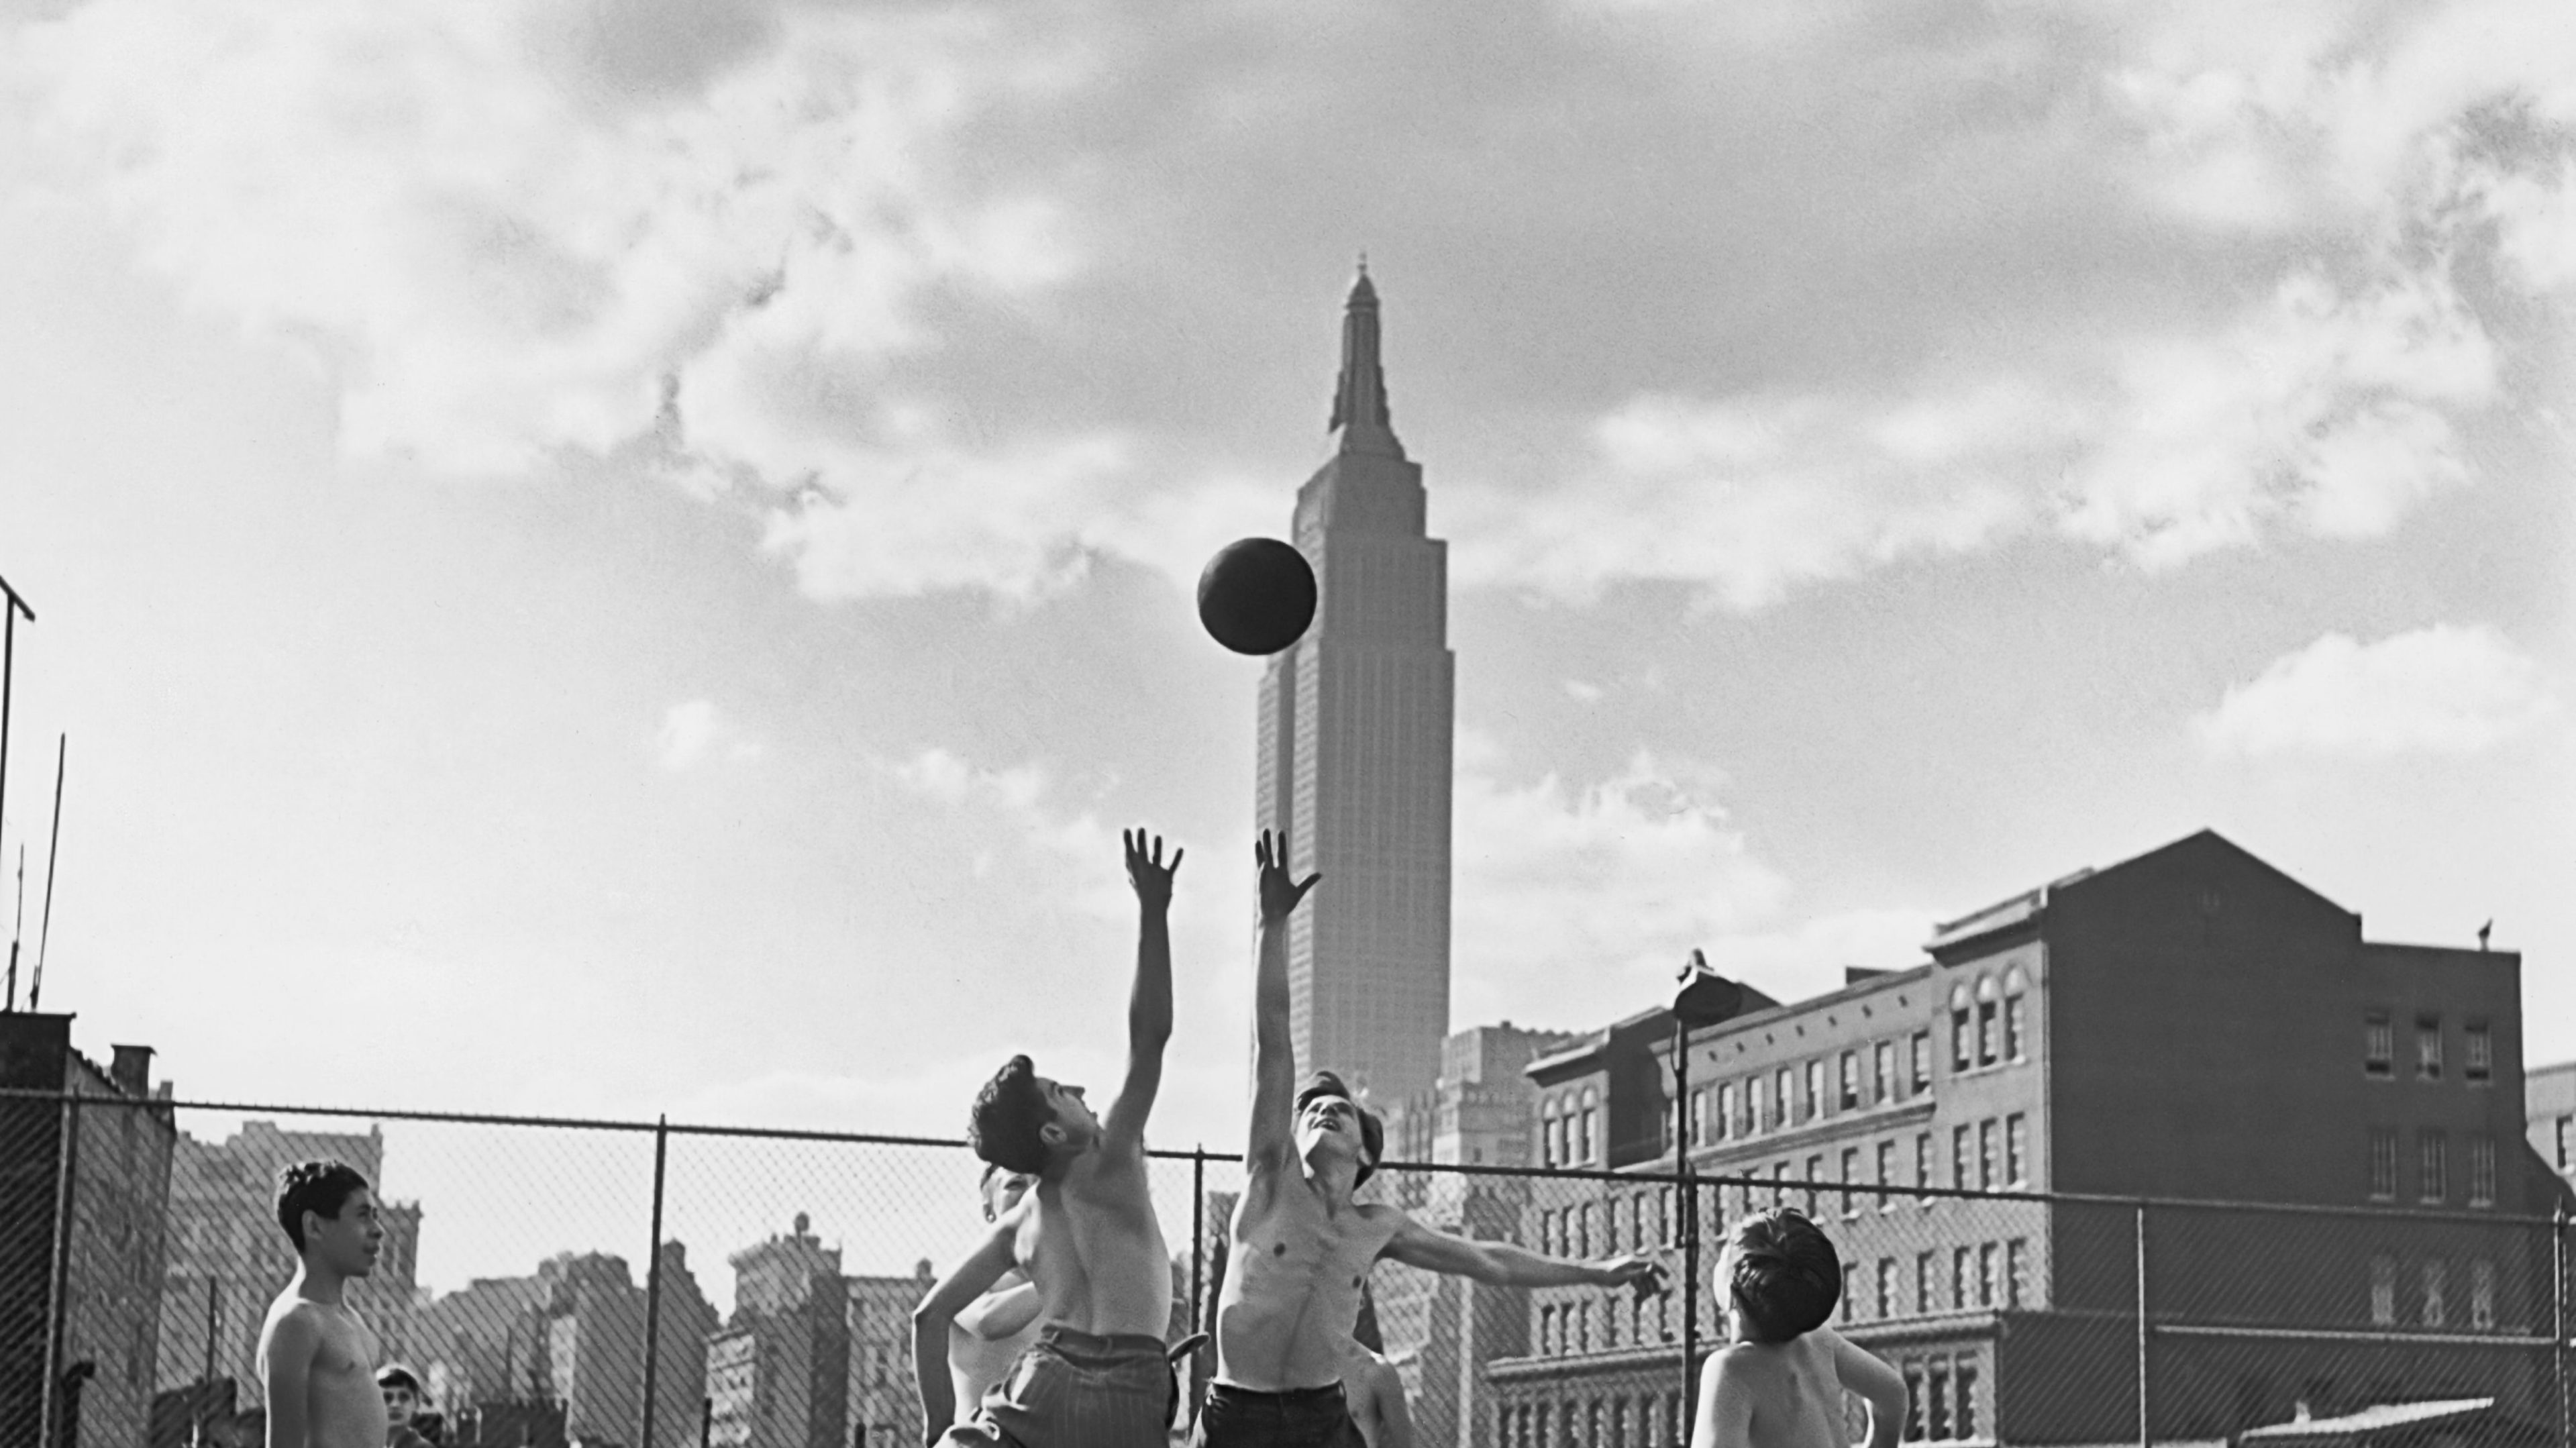 Rooftop basketball in NYC, circa 1950